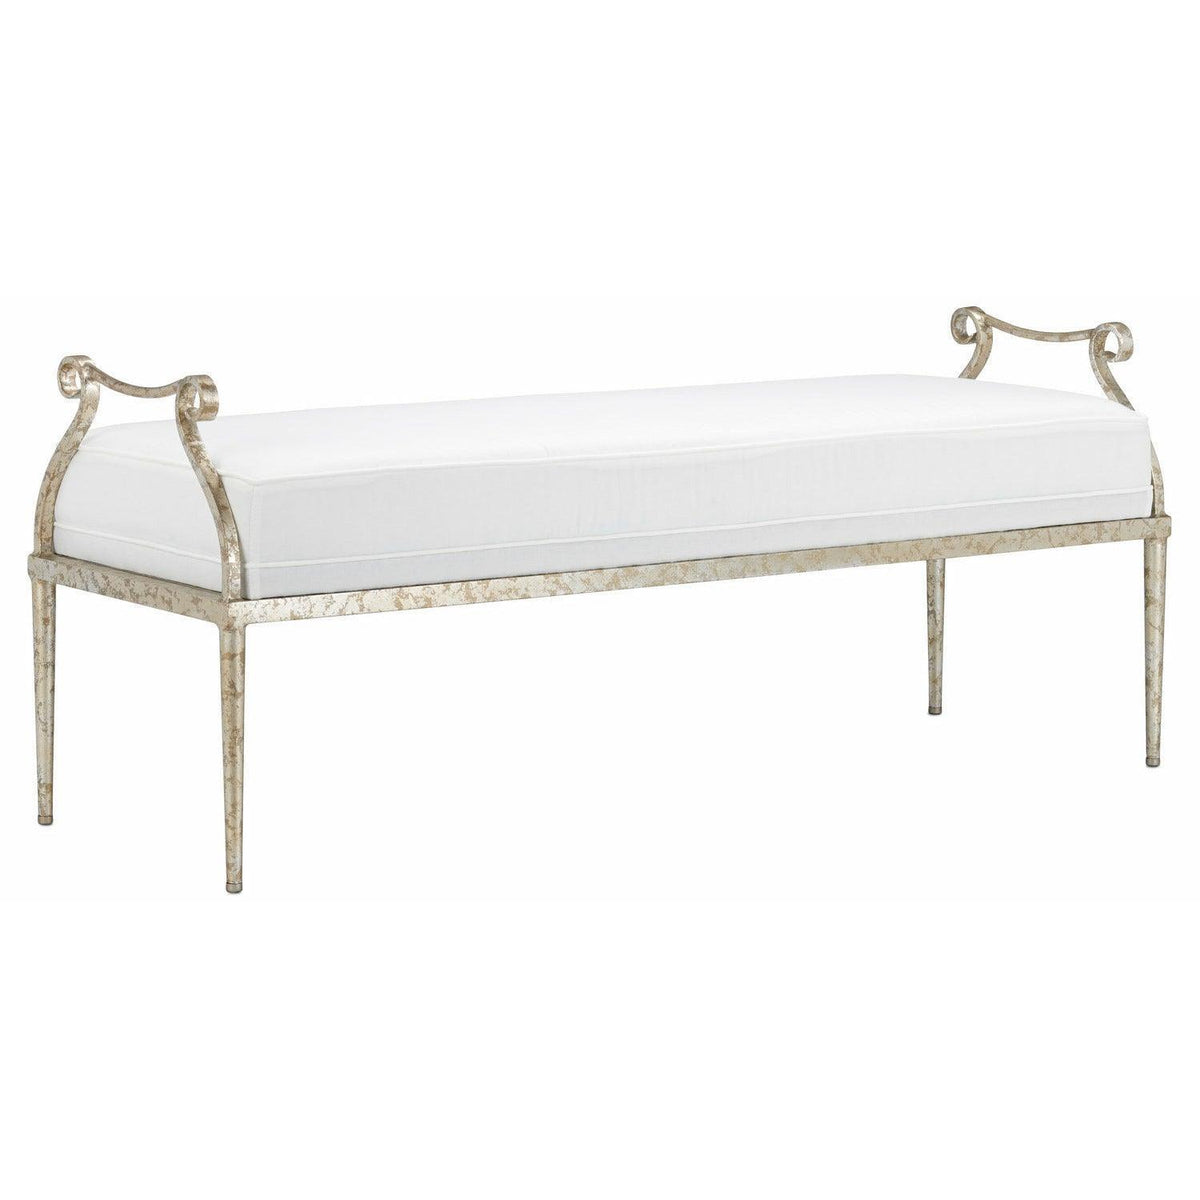 Currey and Company - Genevieve Bench - 7000-0001 | Montreal Lighting & Hardware